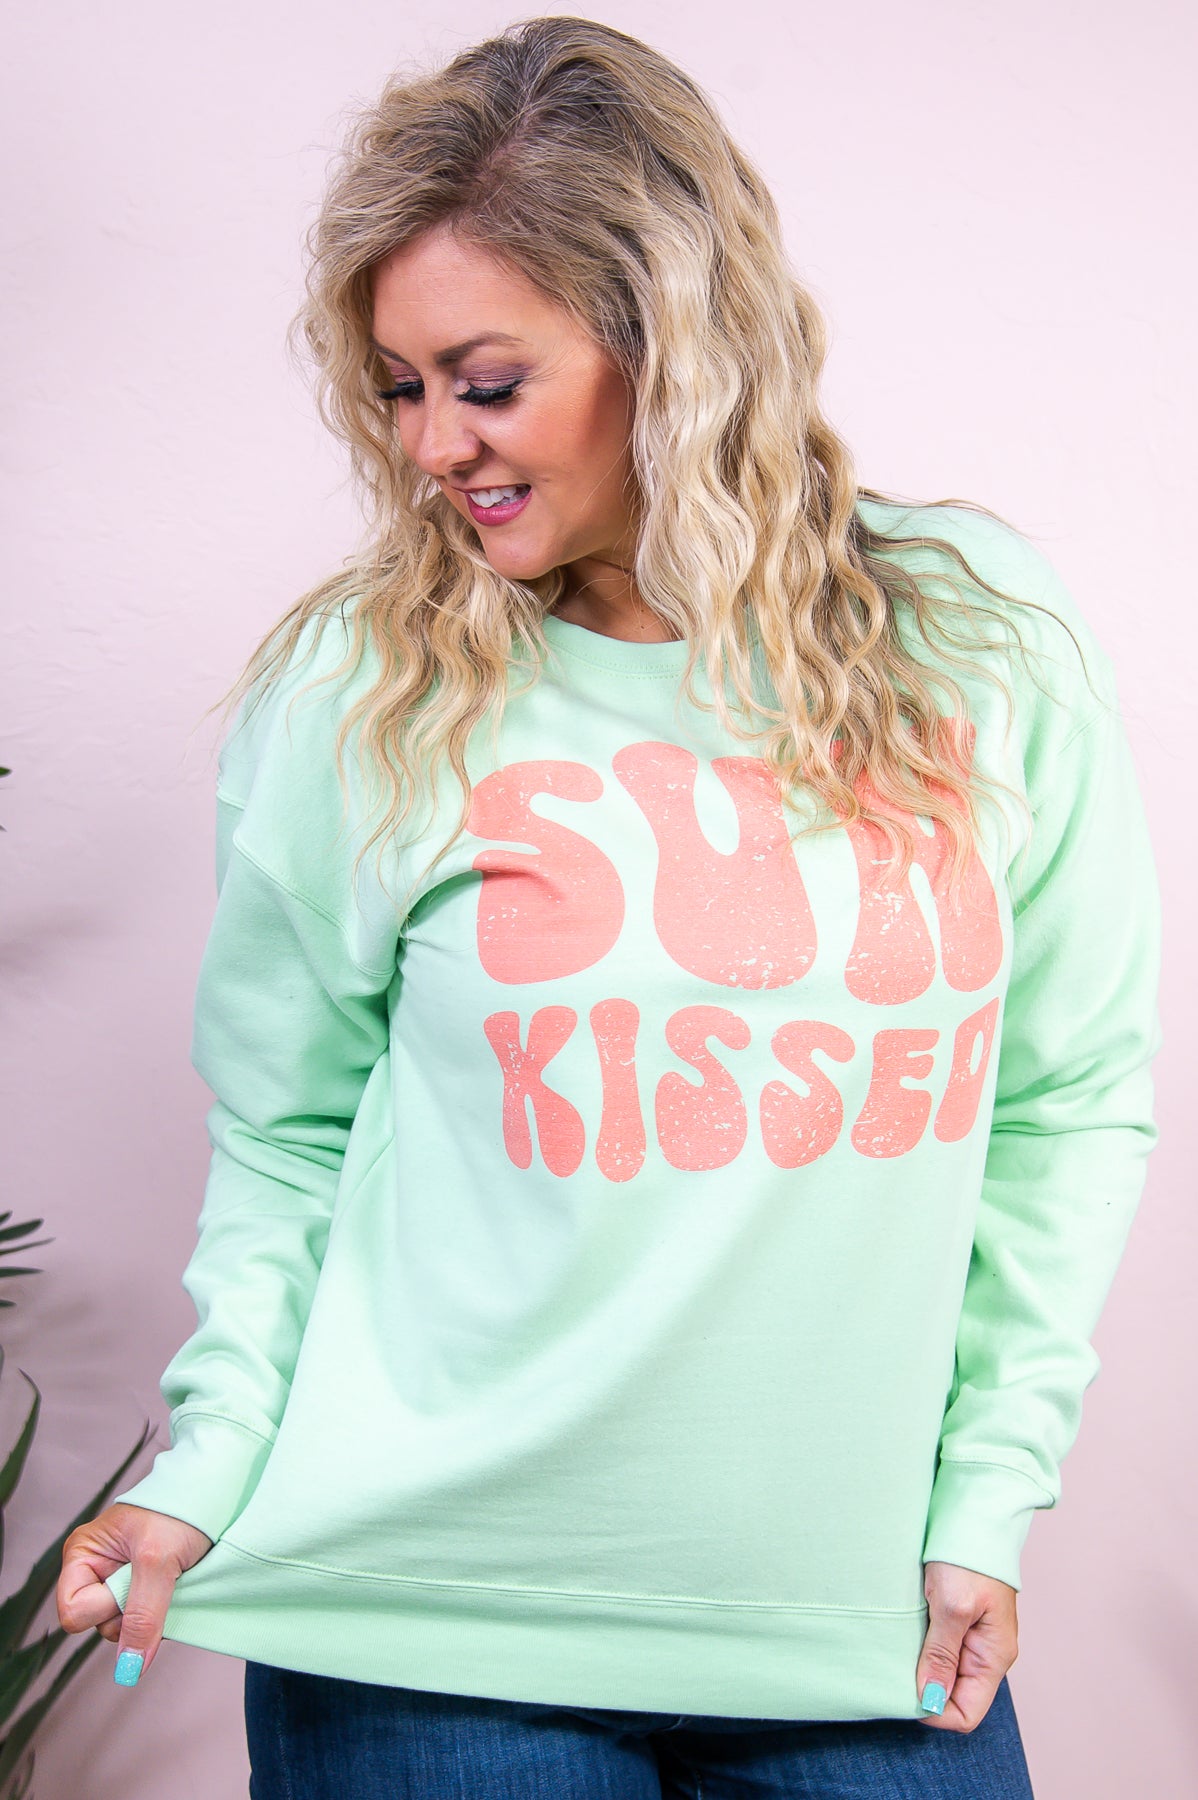 Sunkissed Neo Mint Graphic Sweatshirt - A3334NMT